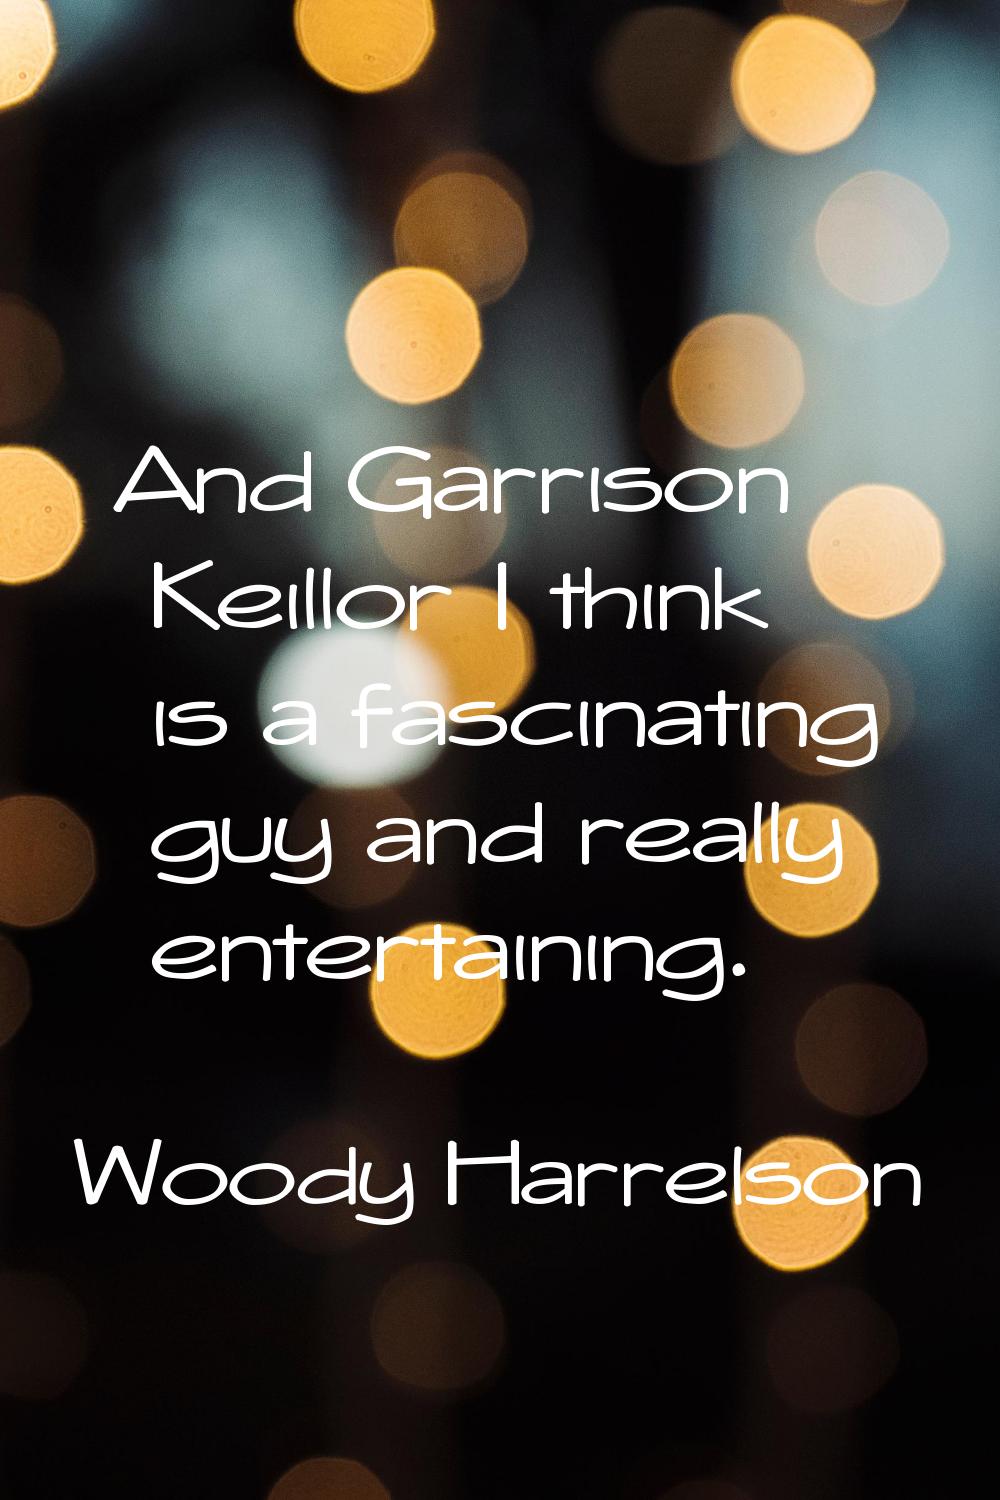 And Garrison Keillor I think is a fascinating guy and really entertaining.